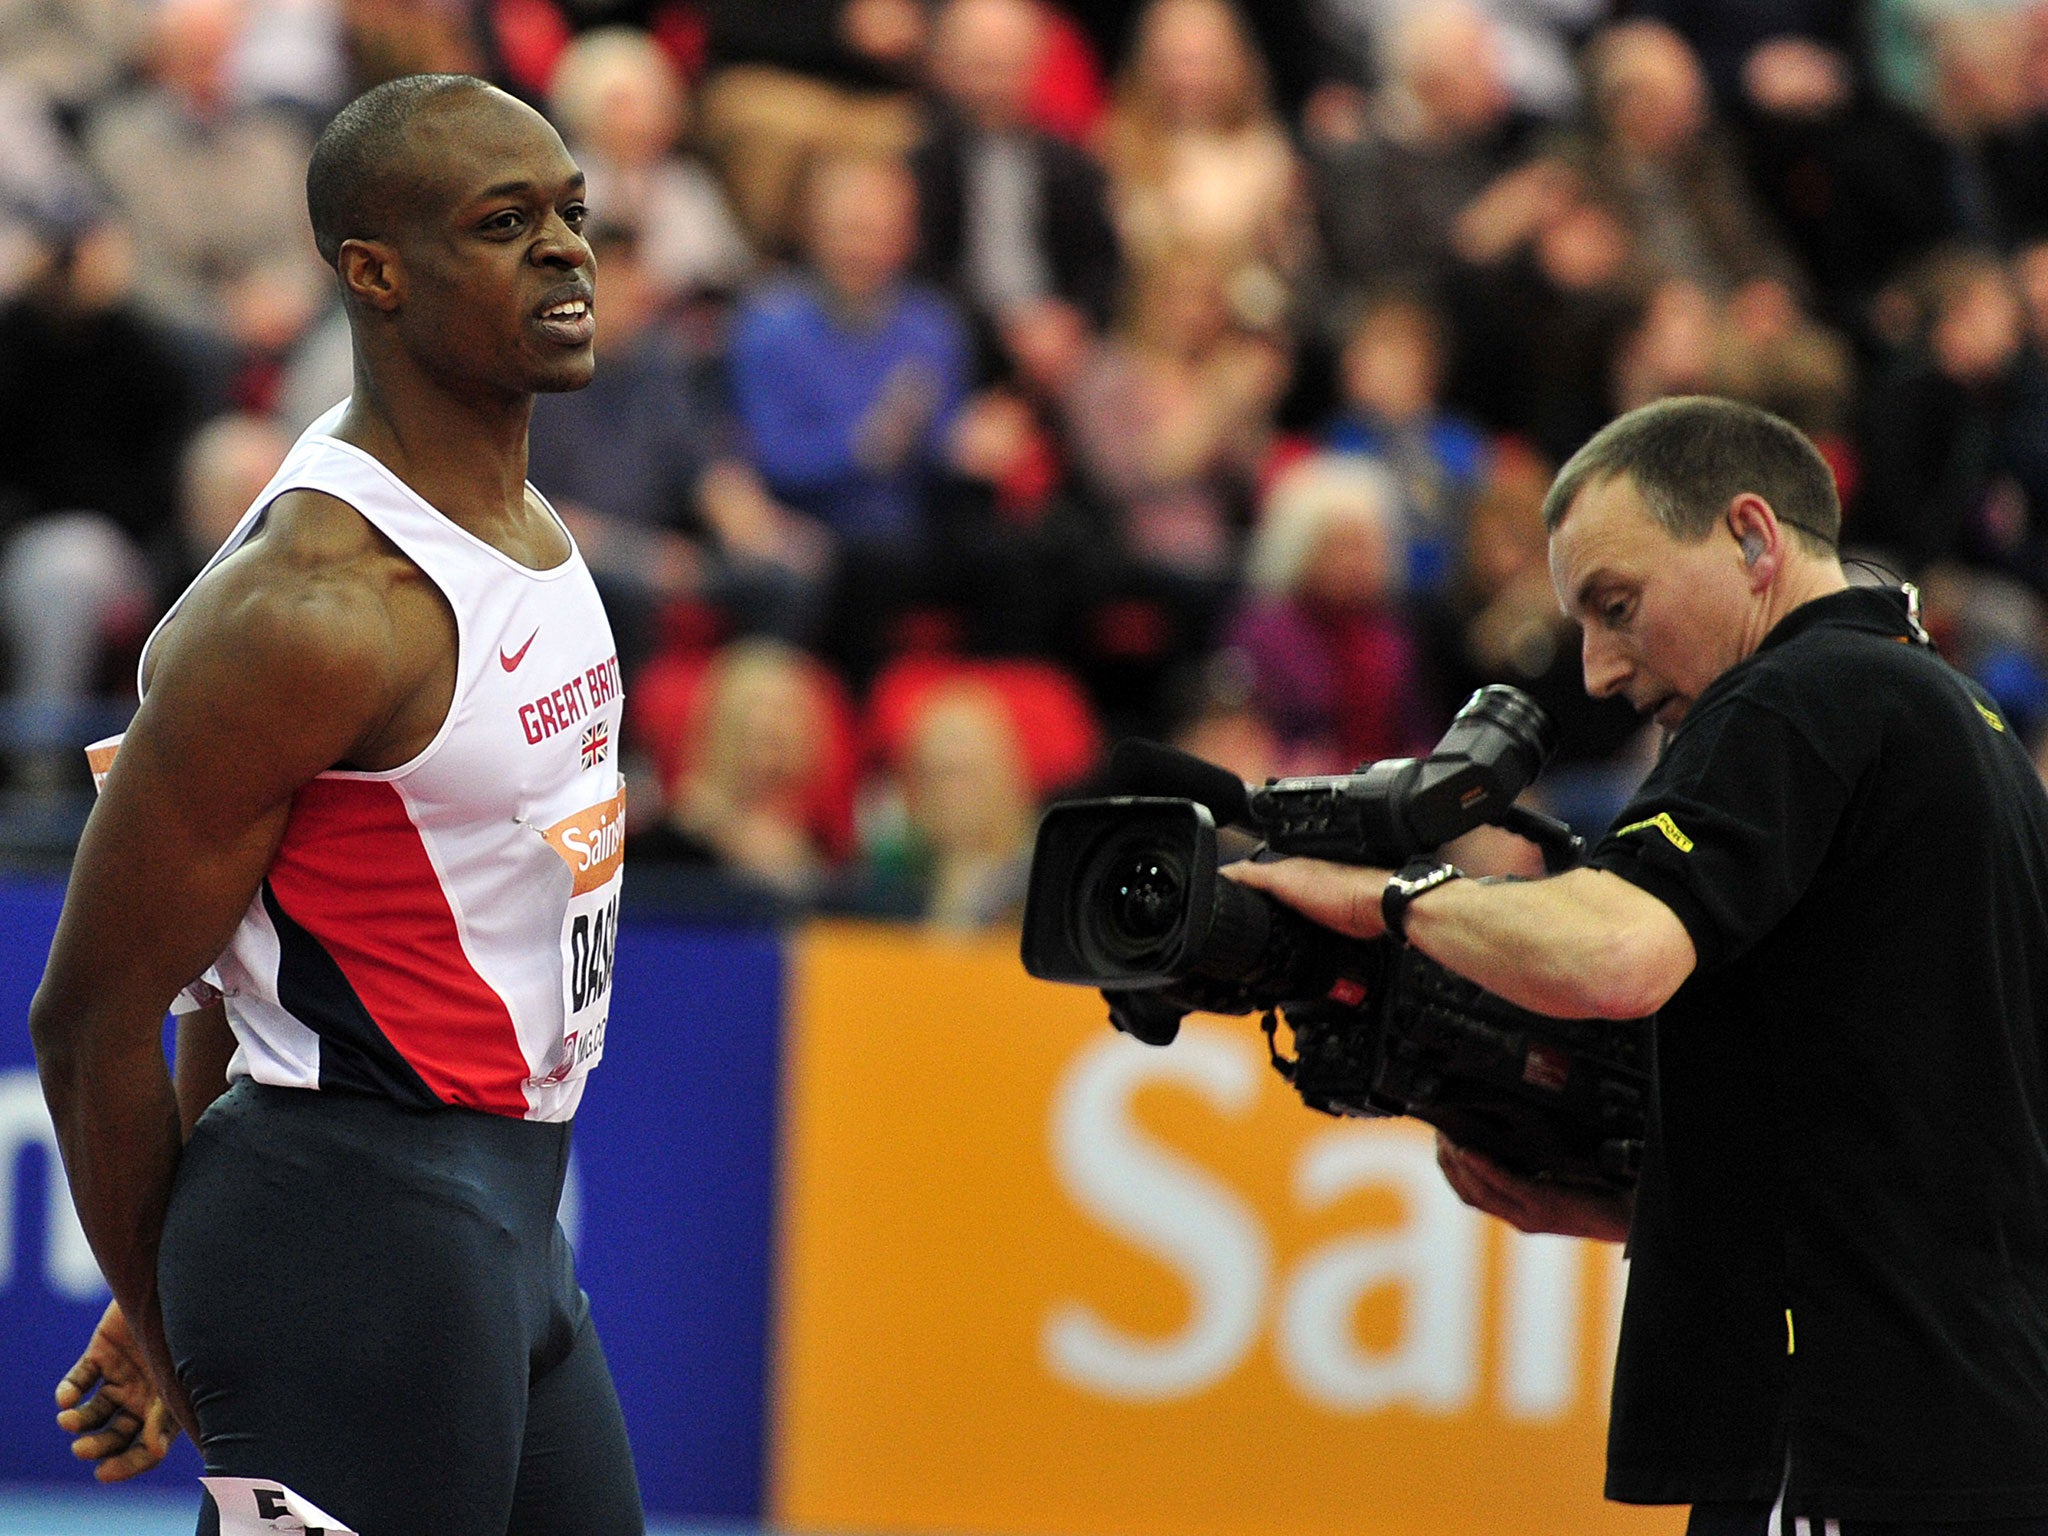 James Dasaolu has been left out of Team England for the Commonwealth Games